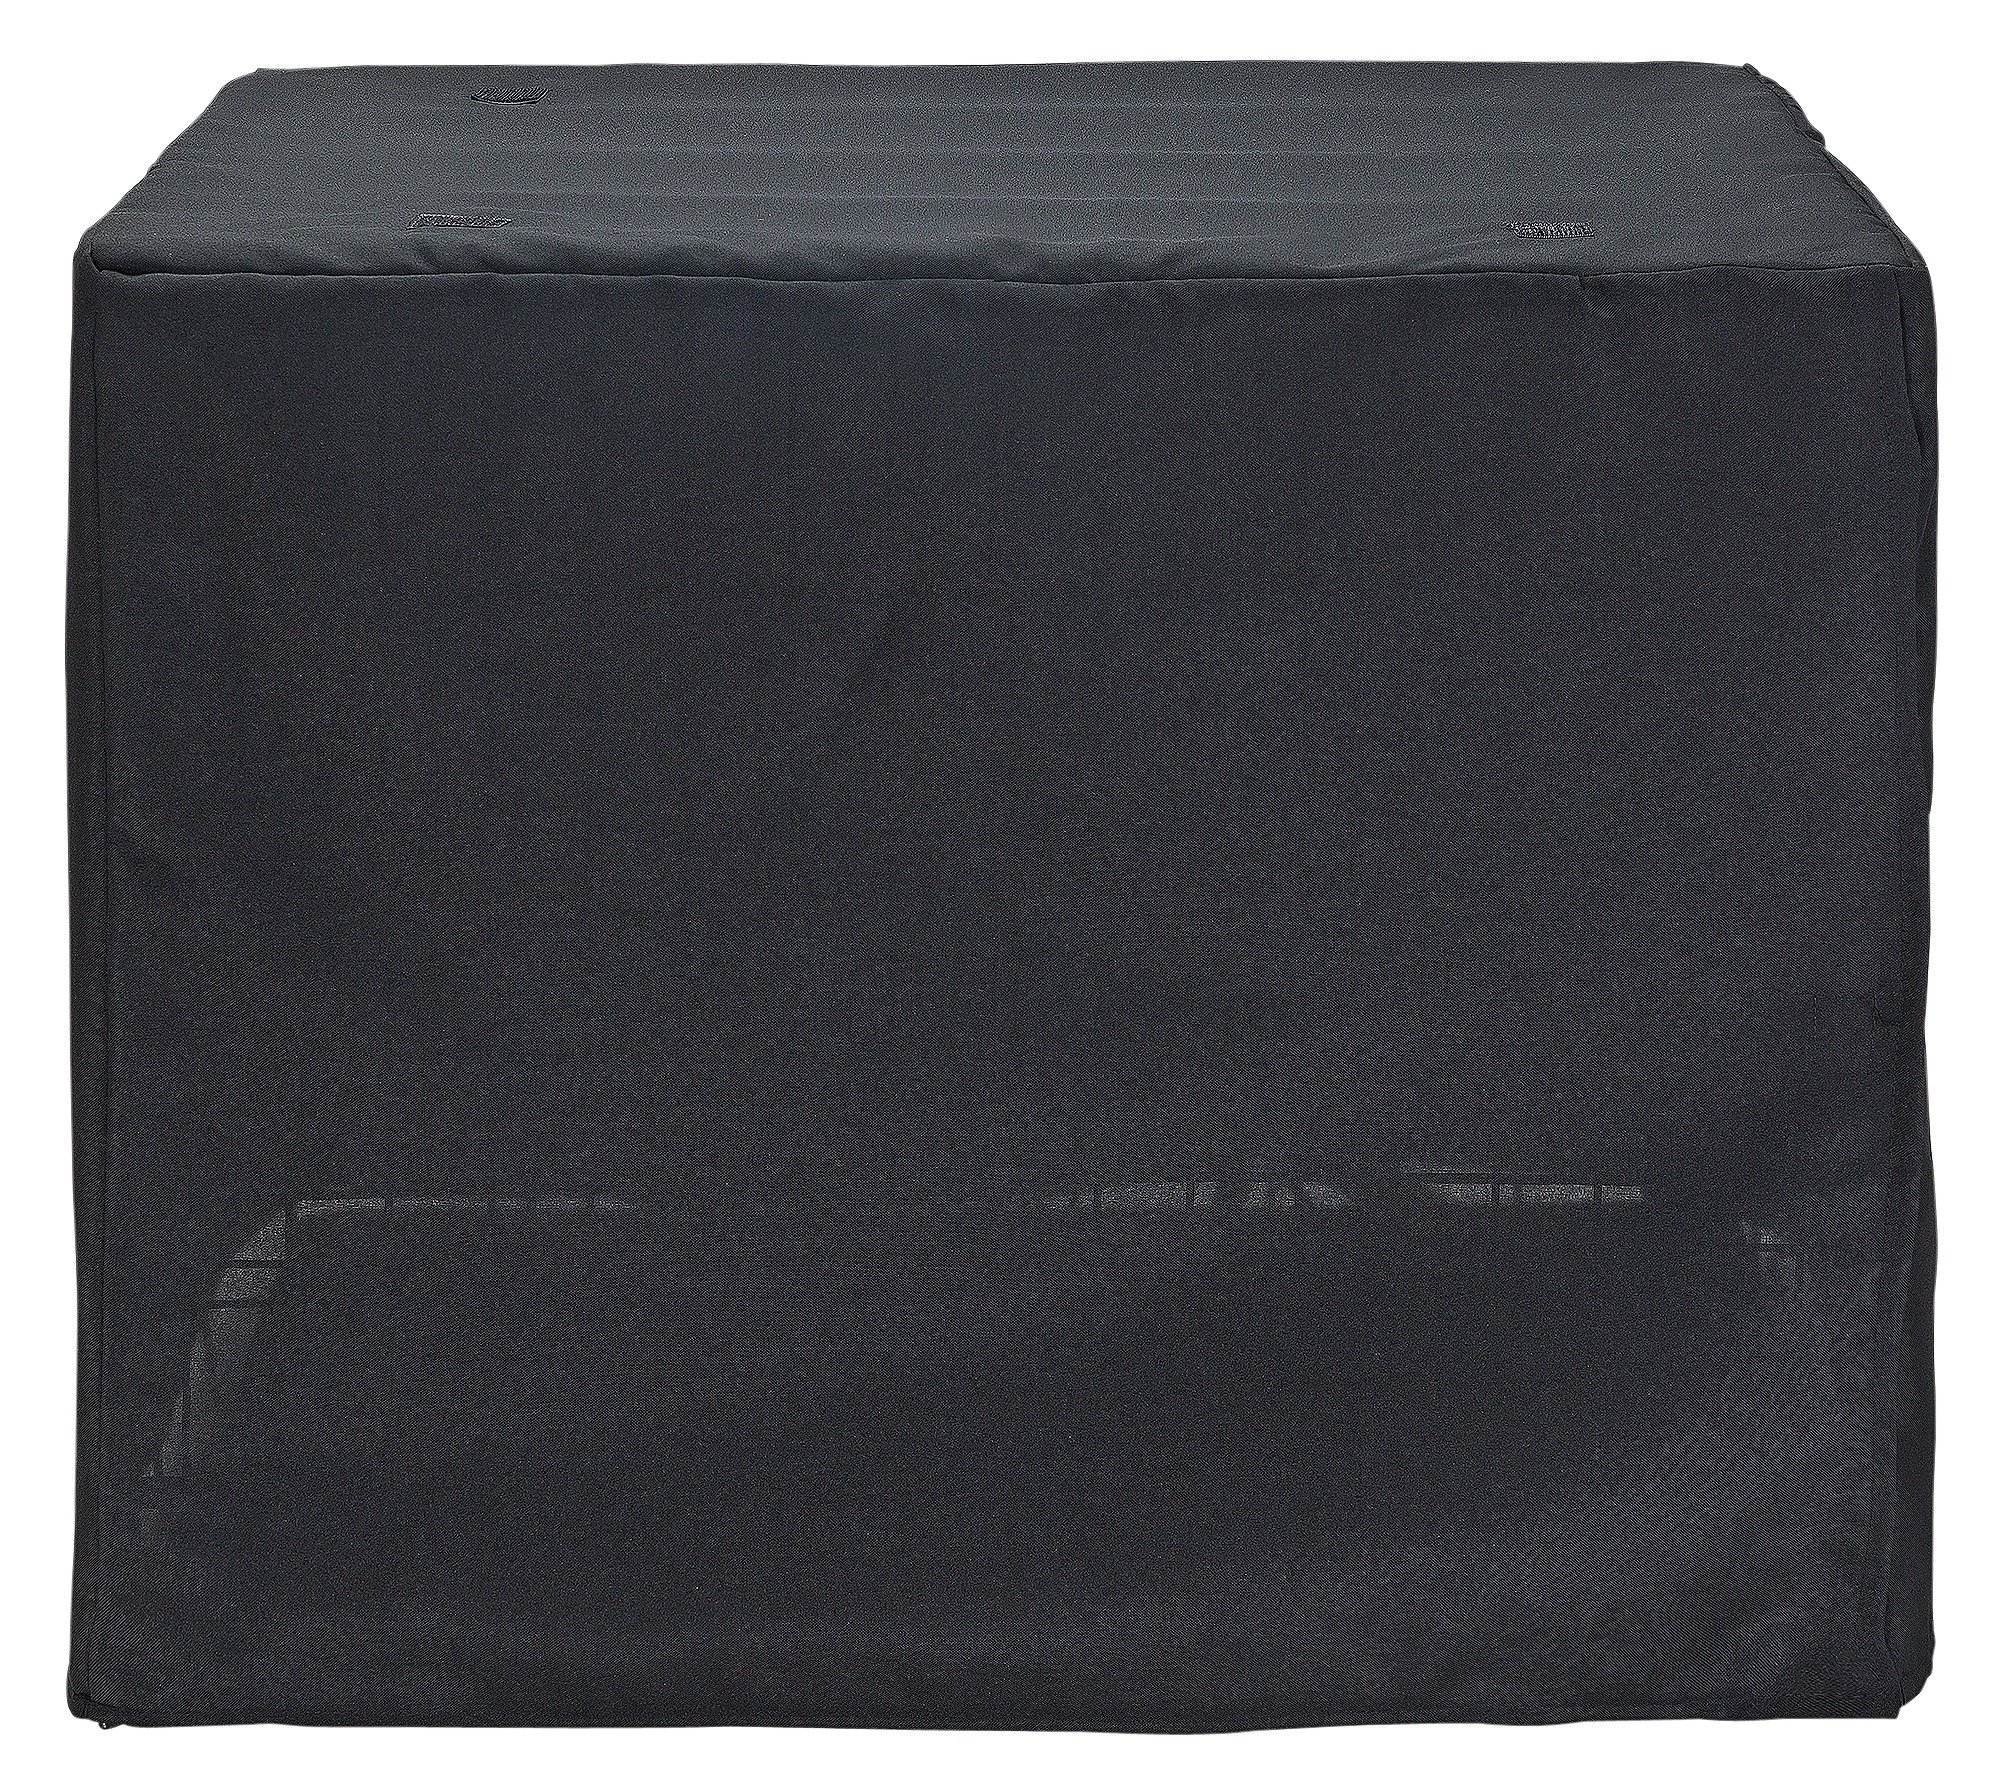 King Pets Crate Cover - Extra Large